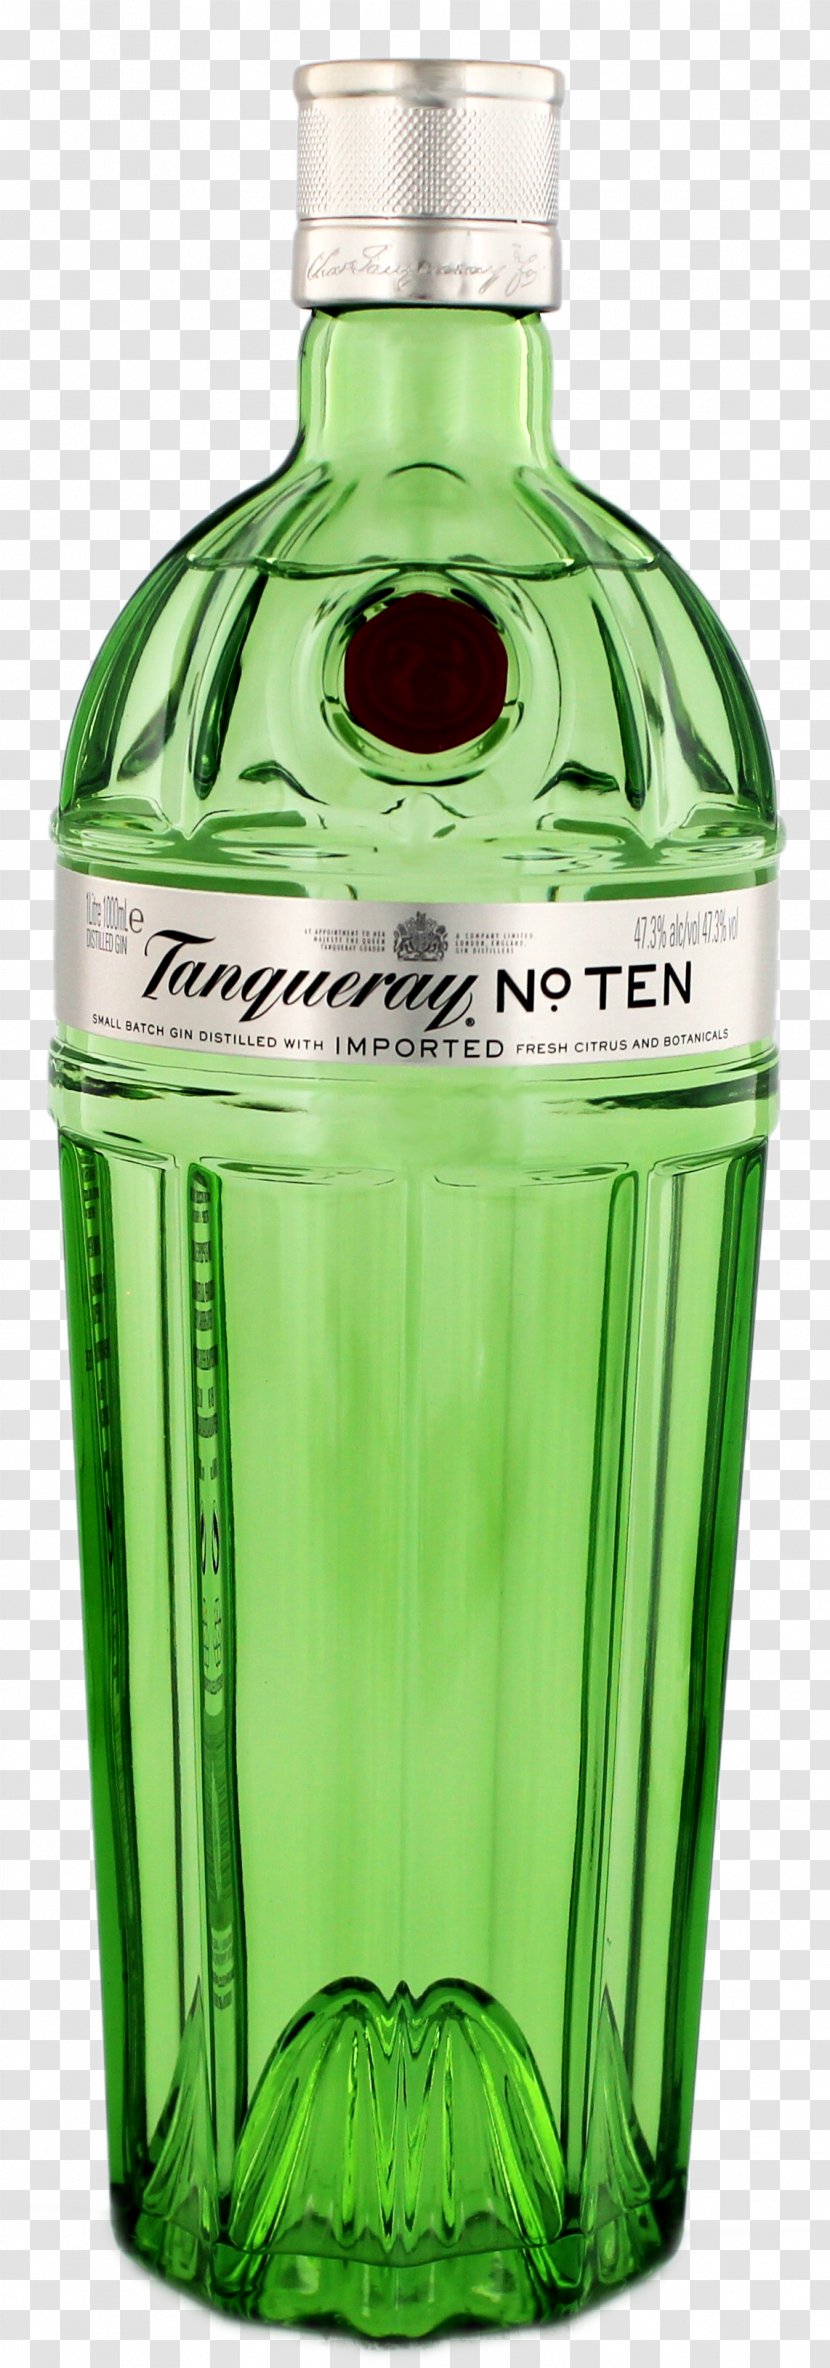 Tanqueray Gin Distilled Beverage Wine Martini - Tonic Transparent PNG